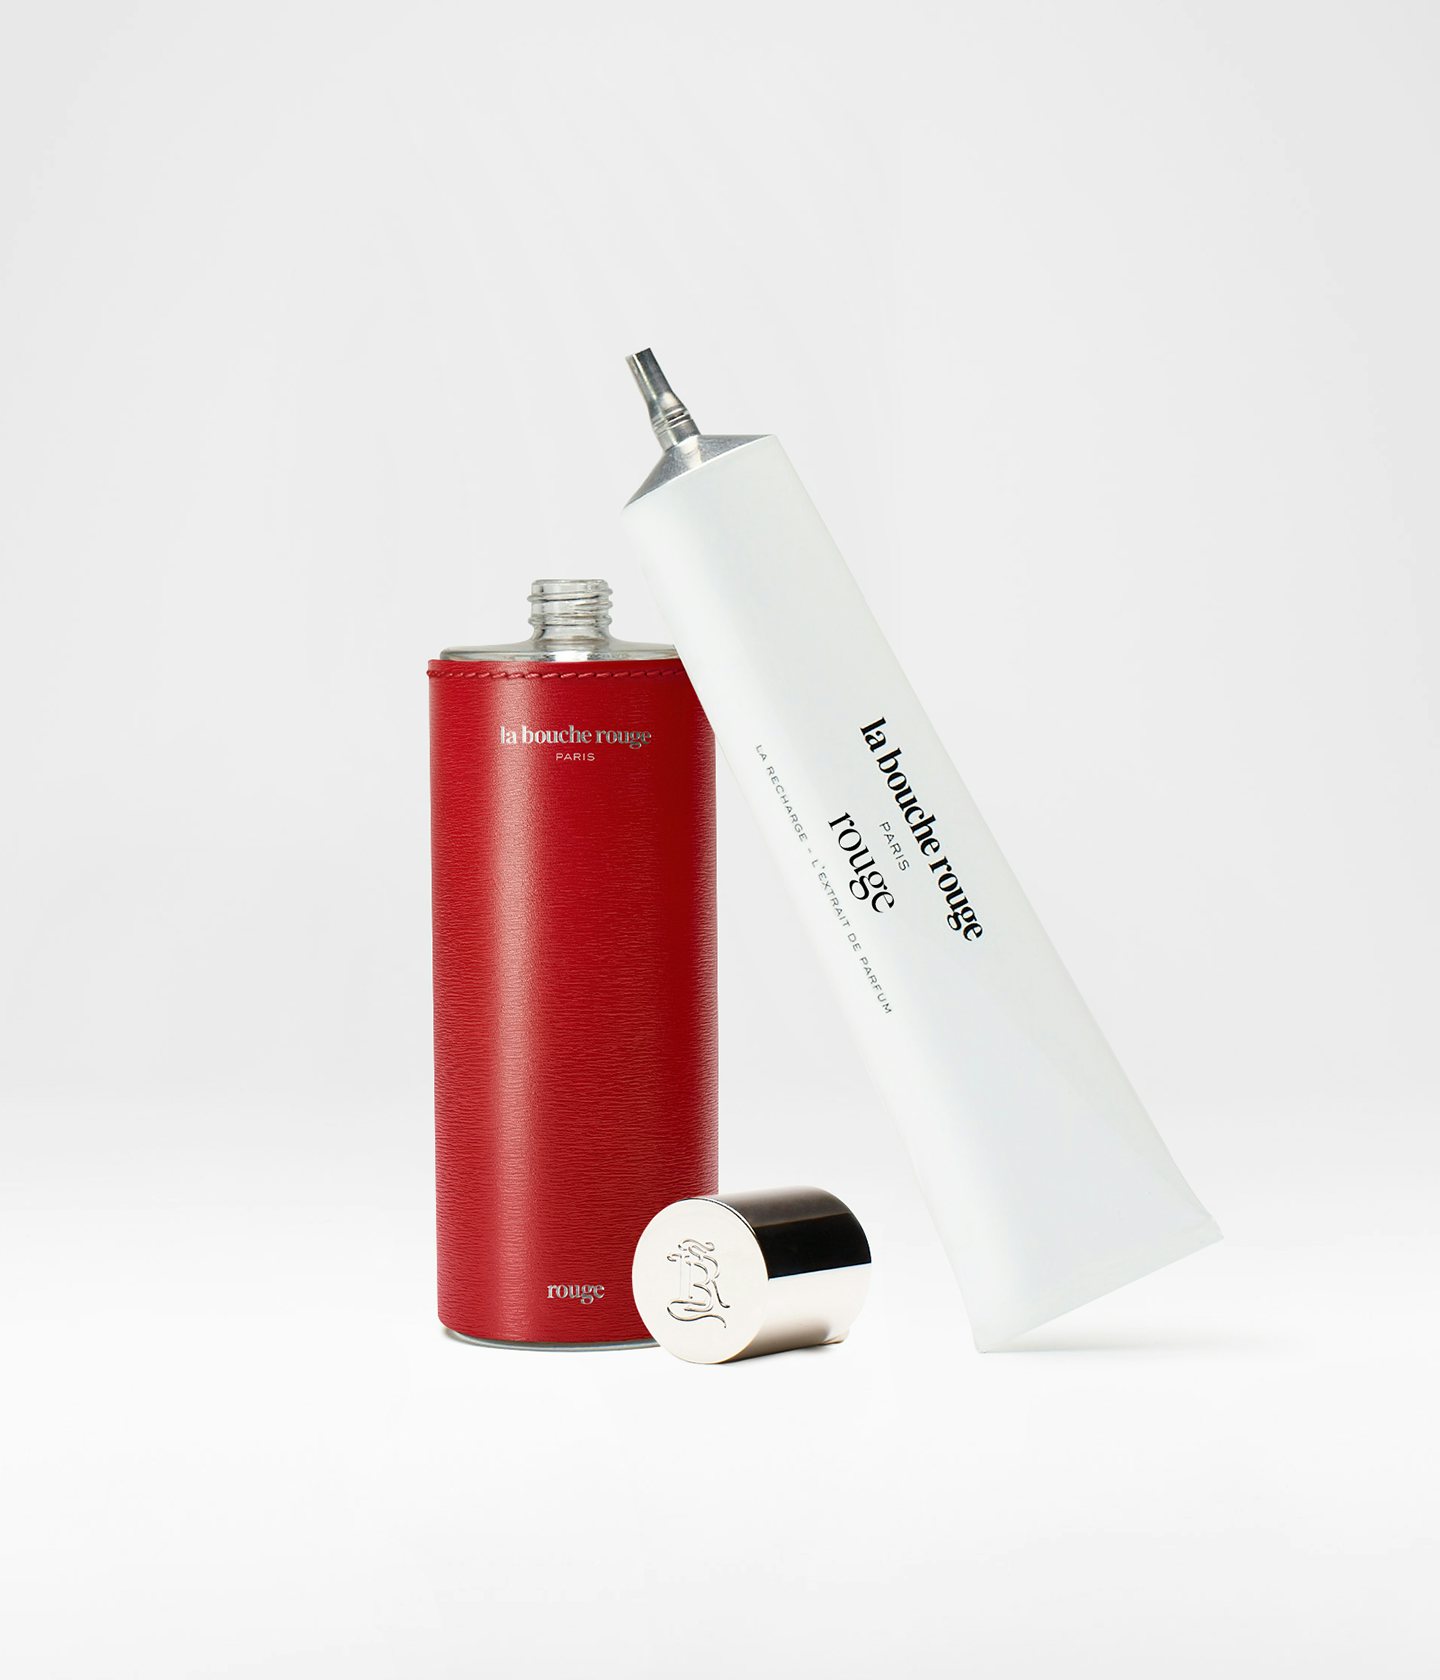 La bouche rouge Rouge refill in red leather case bottle 